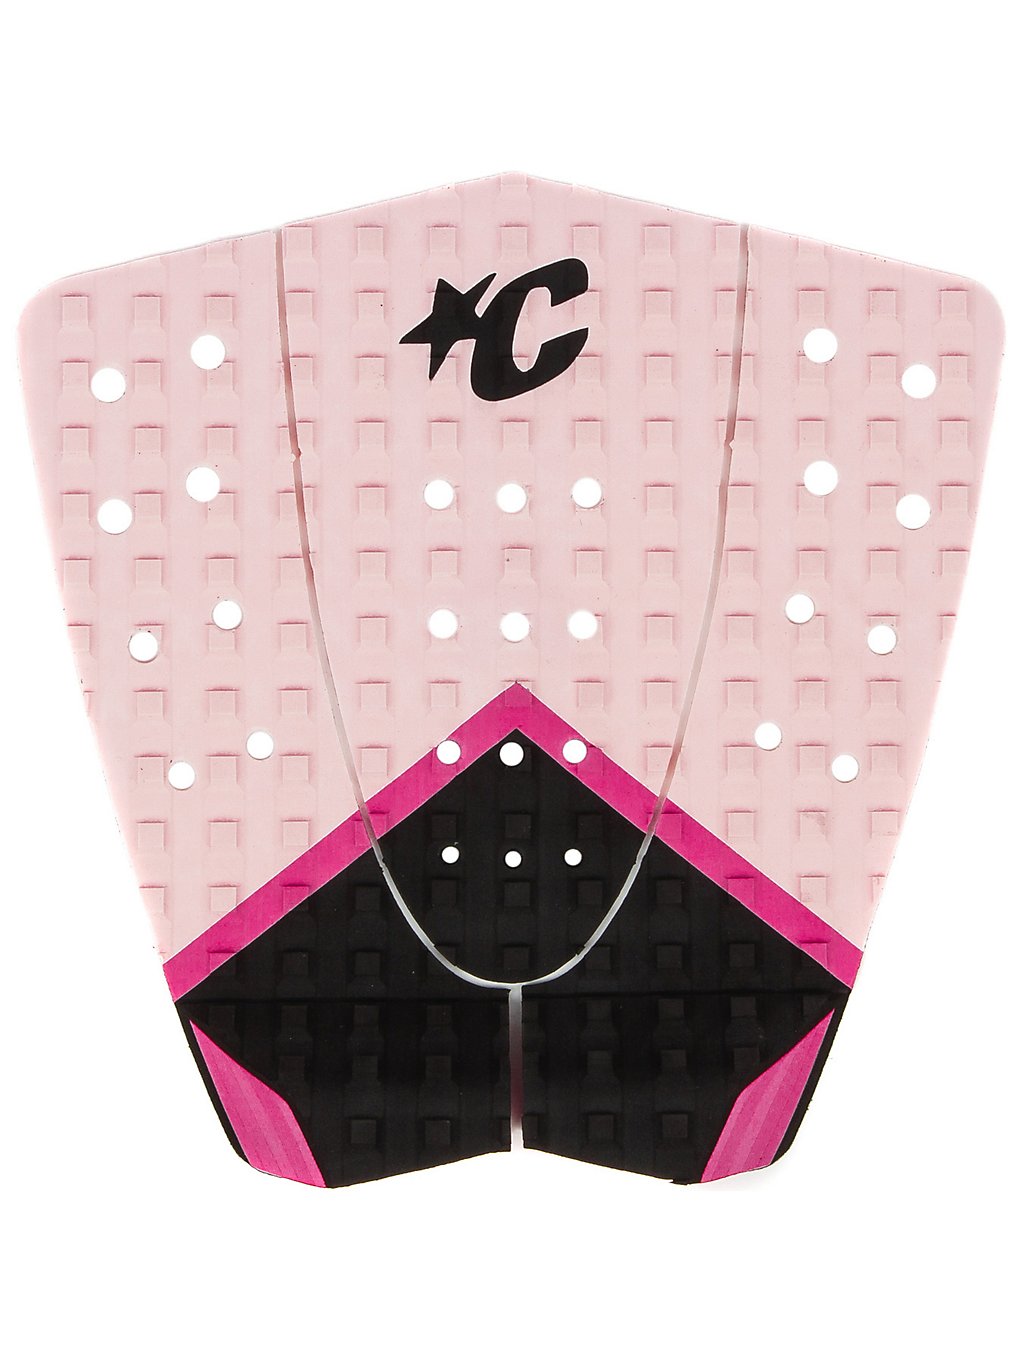 Creatures of Leisure Mini Steph 3 Piece Traction Pad rose